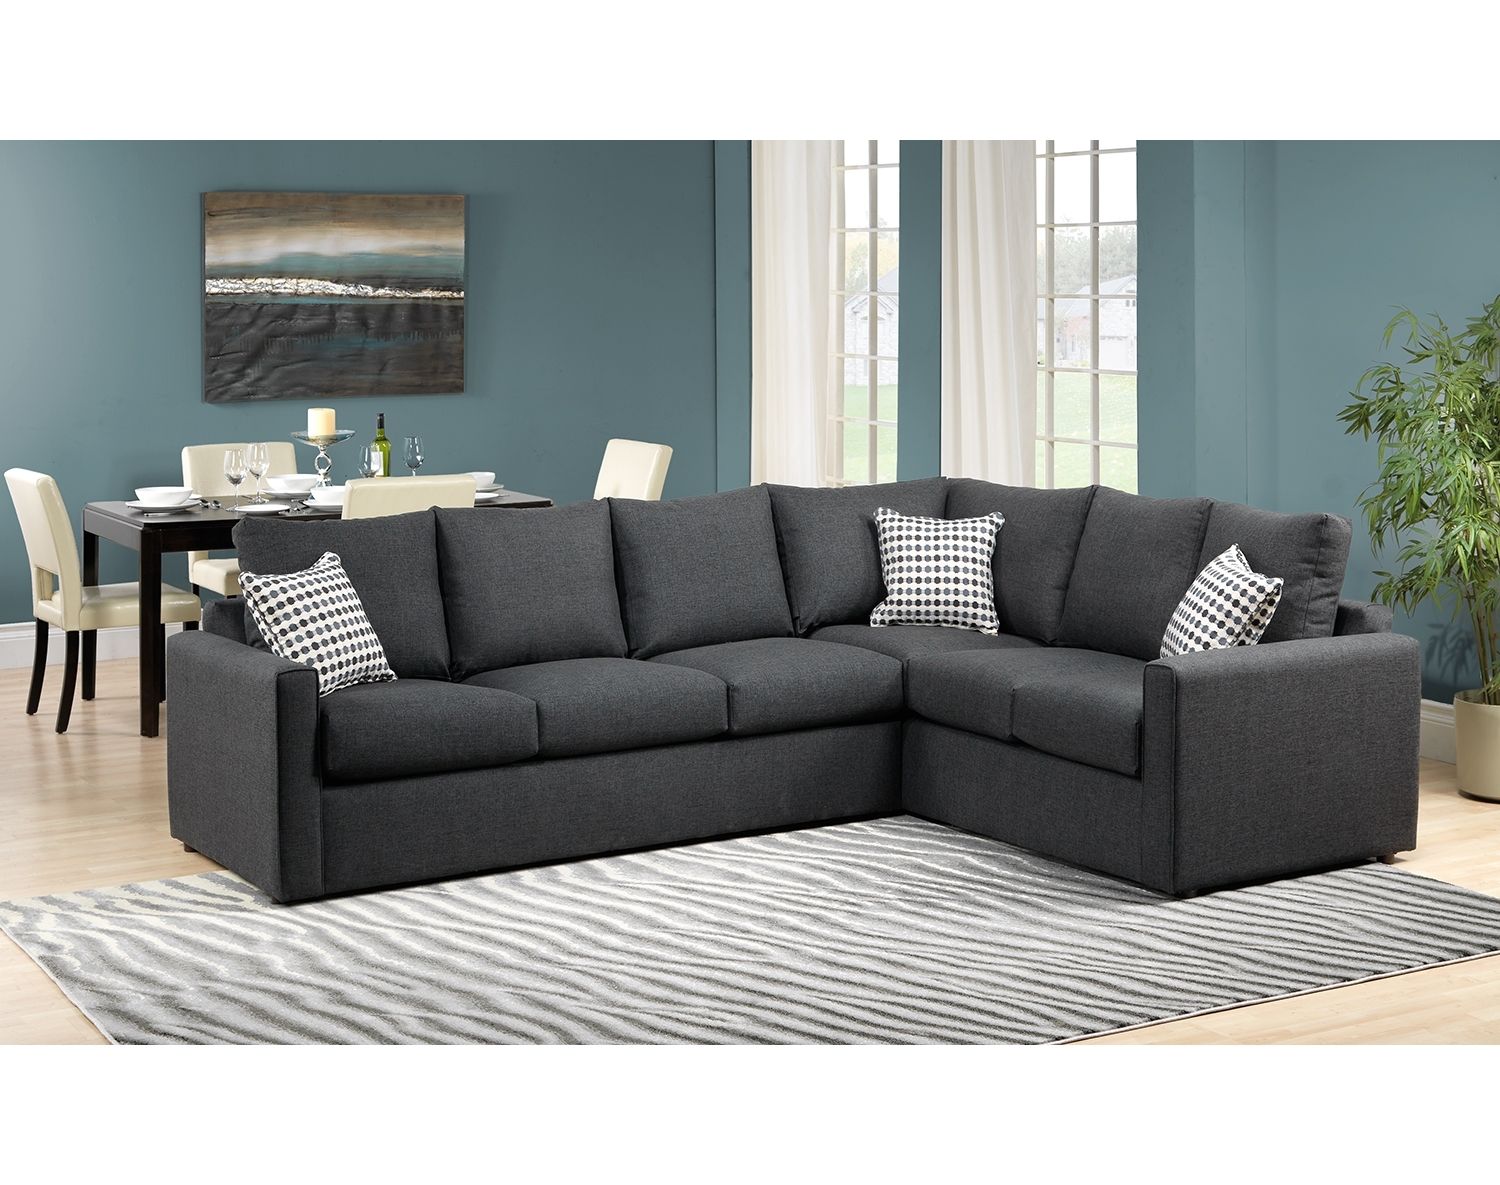 Best Cheap Sofa Bed Sectionals 21 On Diana Dark Brown Leather Inside Diana Dark Brown Leather Sectional Sofa Set (Photo 9 of 12)